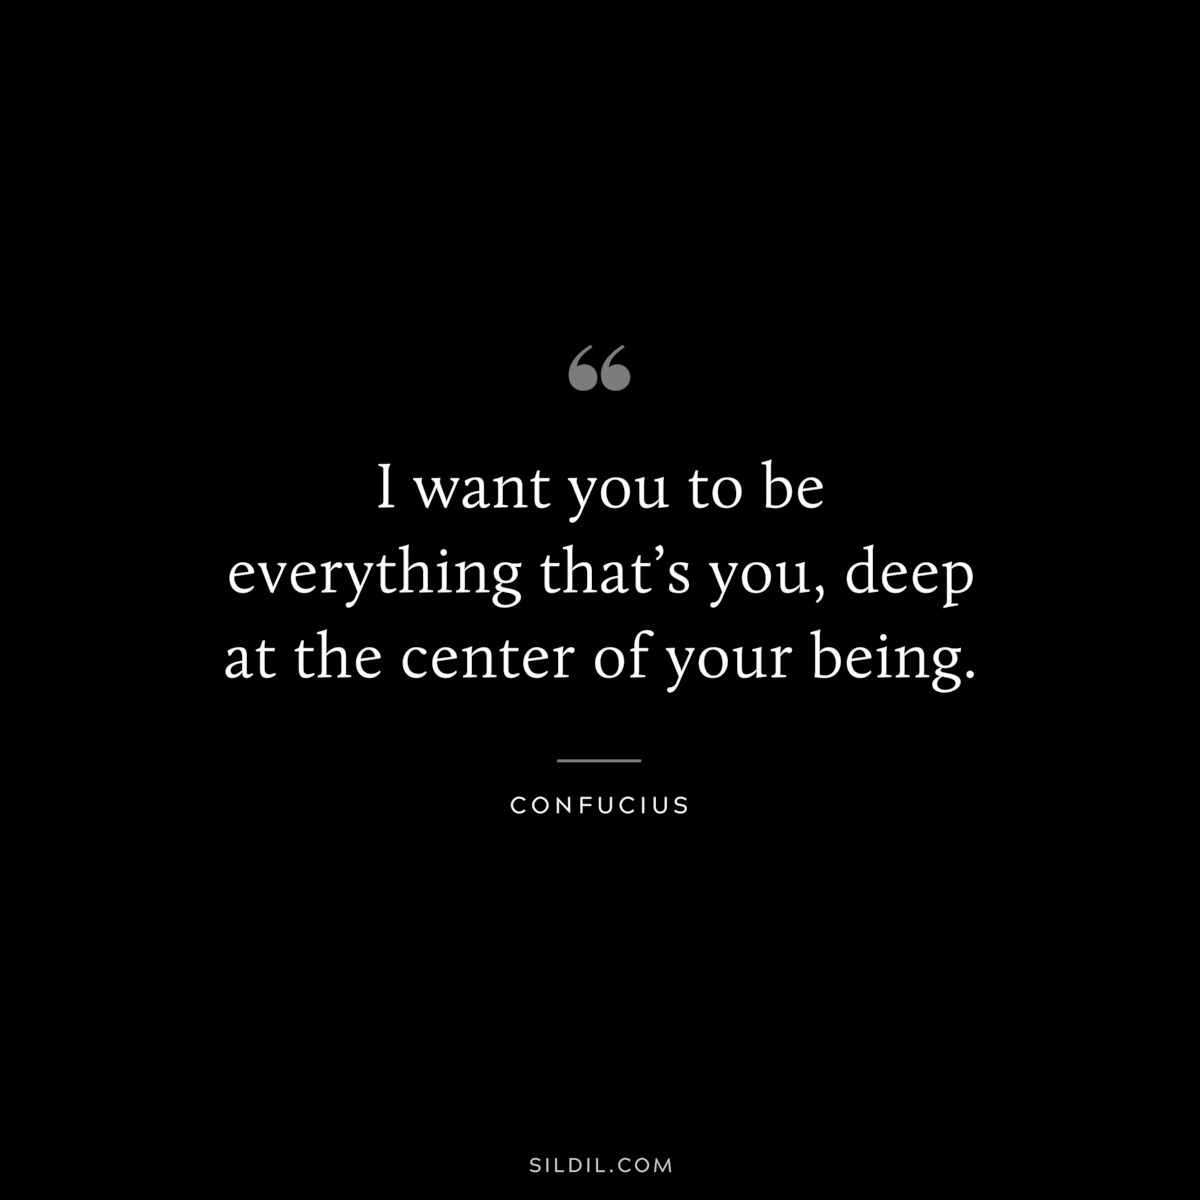 I want you to be everything that’s you, deep at the center of your being. ― Confucius